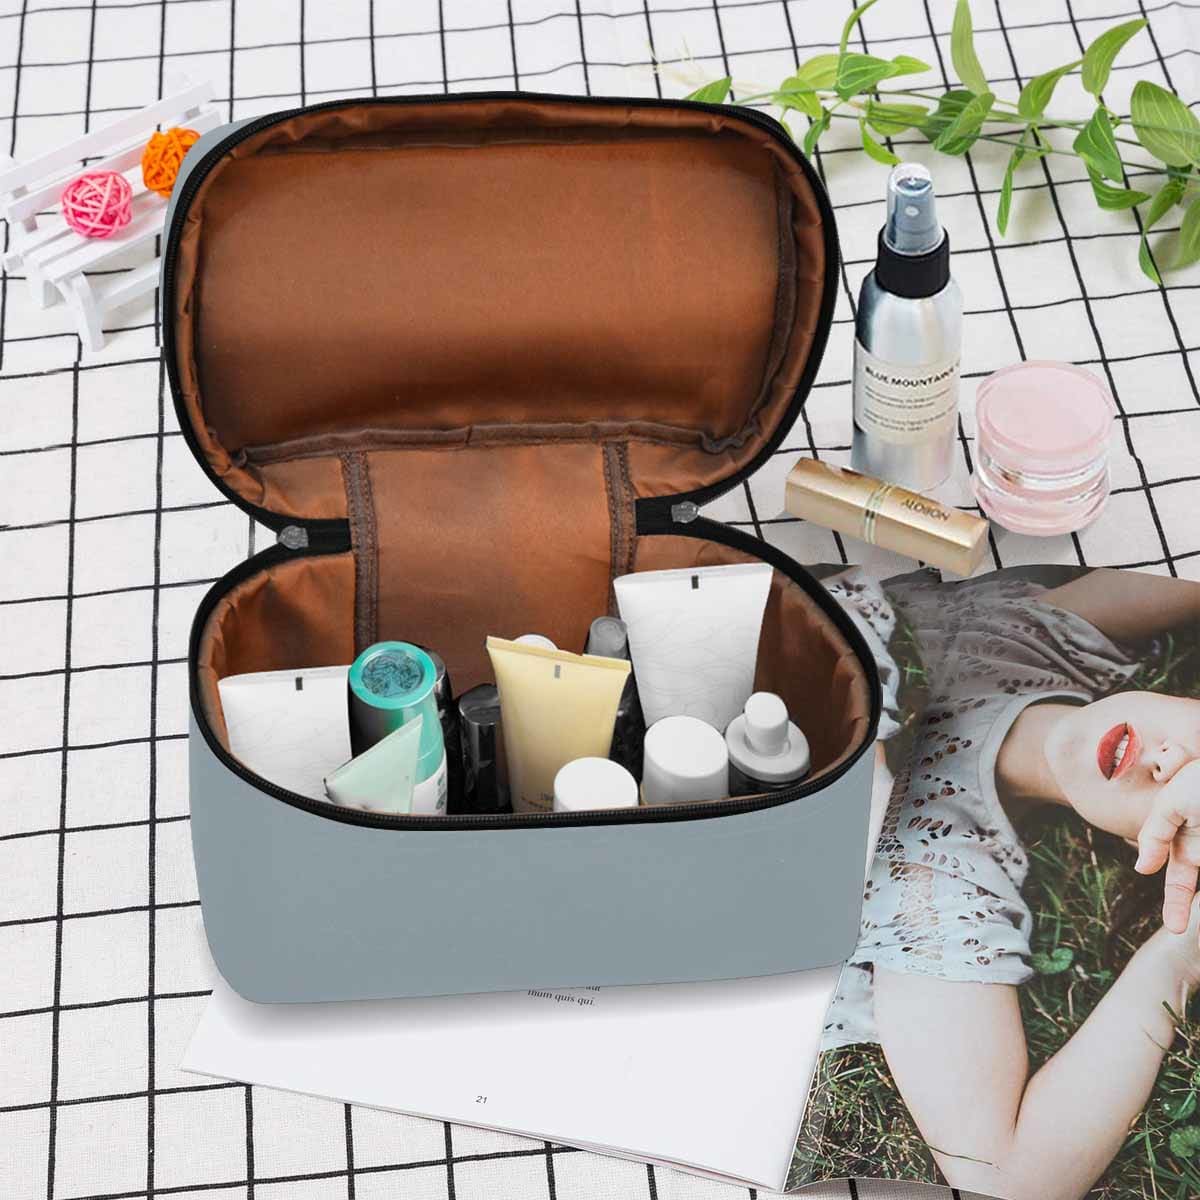 Cosmetic Bag Misty Blue Gray Travel Case - Bags | Cosmetic Bags